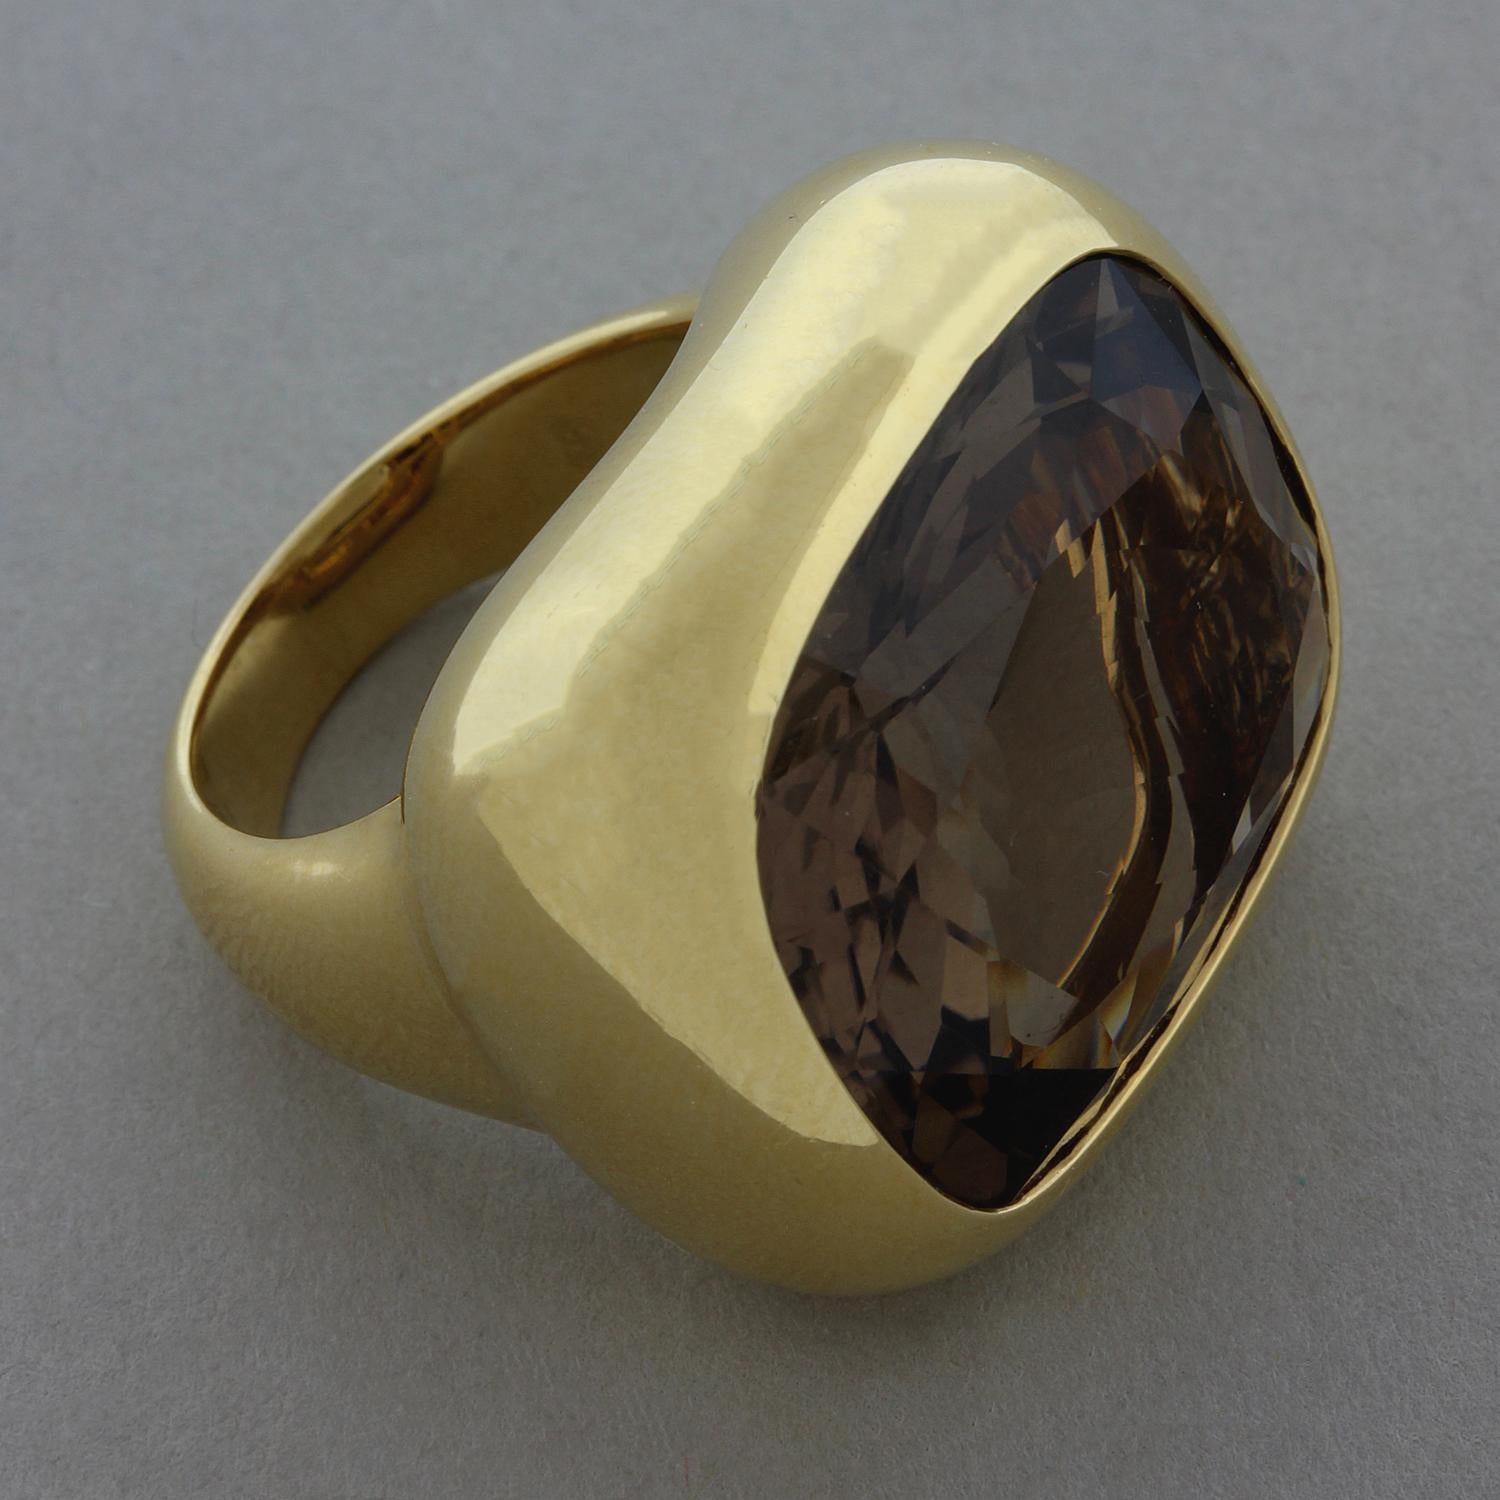 A simple yet over the top cocktail ring featuring a 22.57 carat smoky quartz. The cushion cut smoky quartz is bezel set in an 18K yellow gold setting. A bold ring that will surely impress.

Ring Size 6.5 (Sizable)
